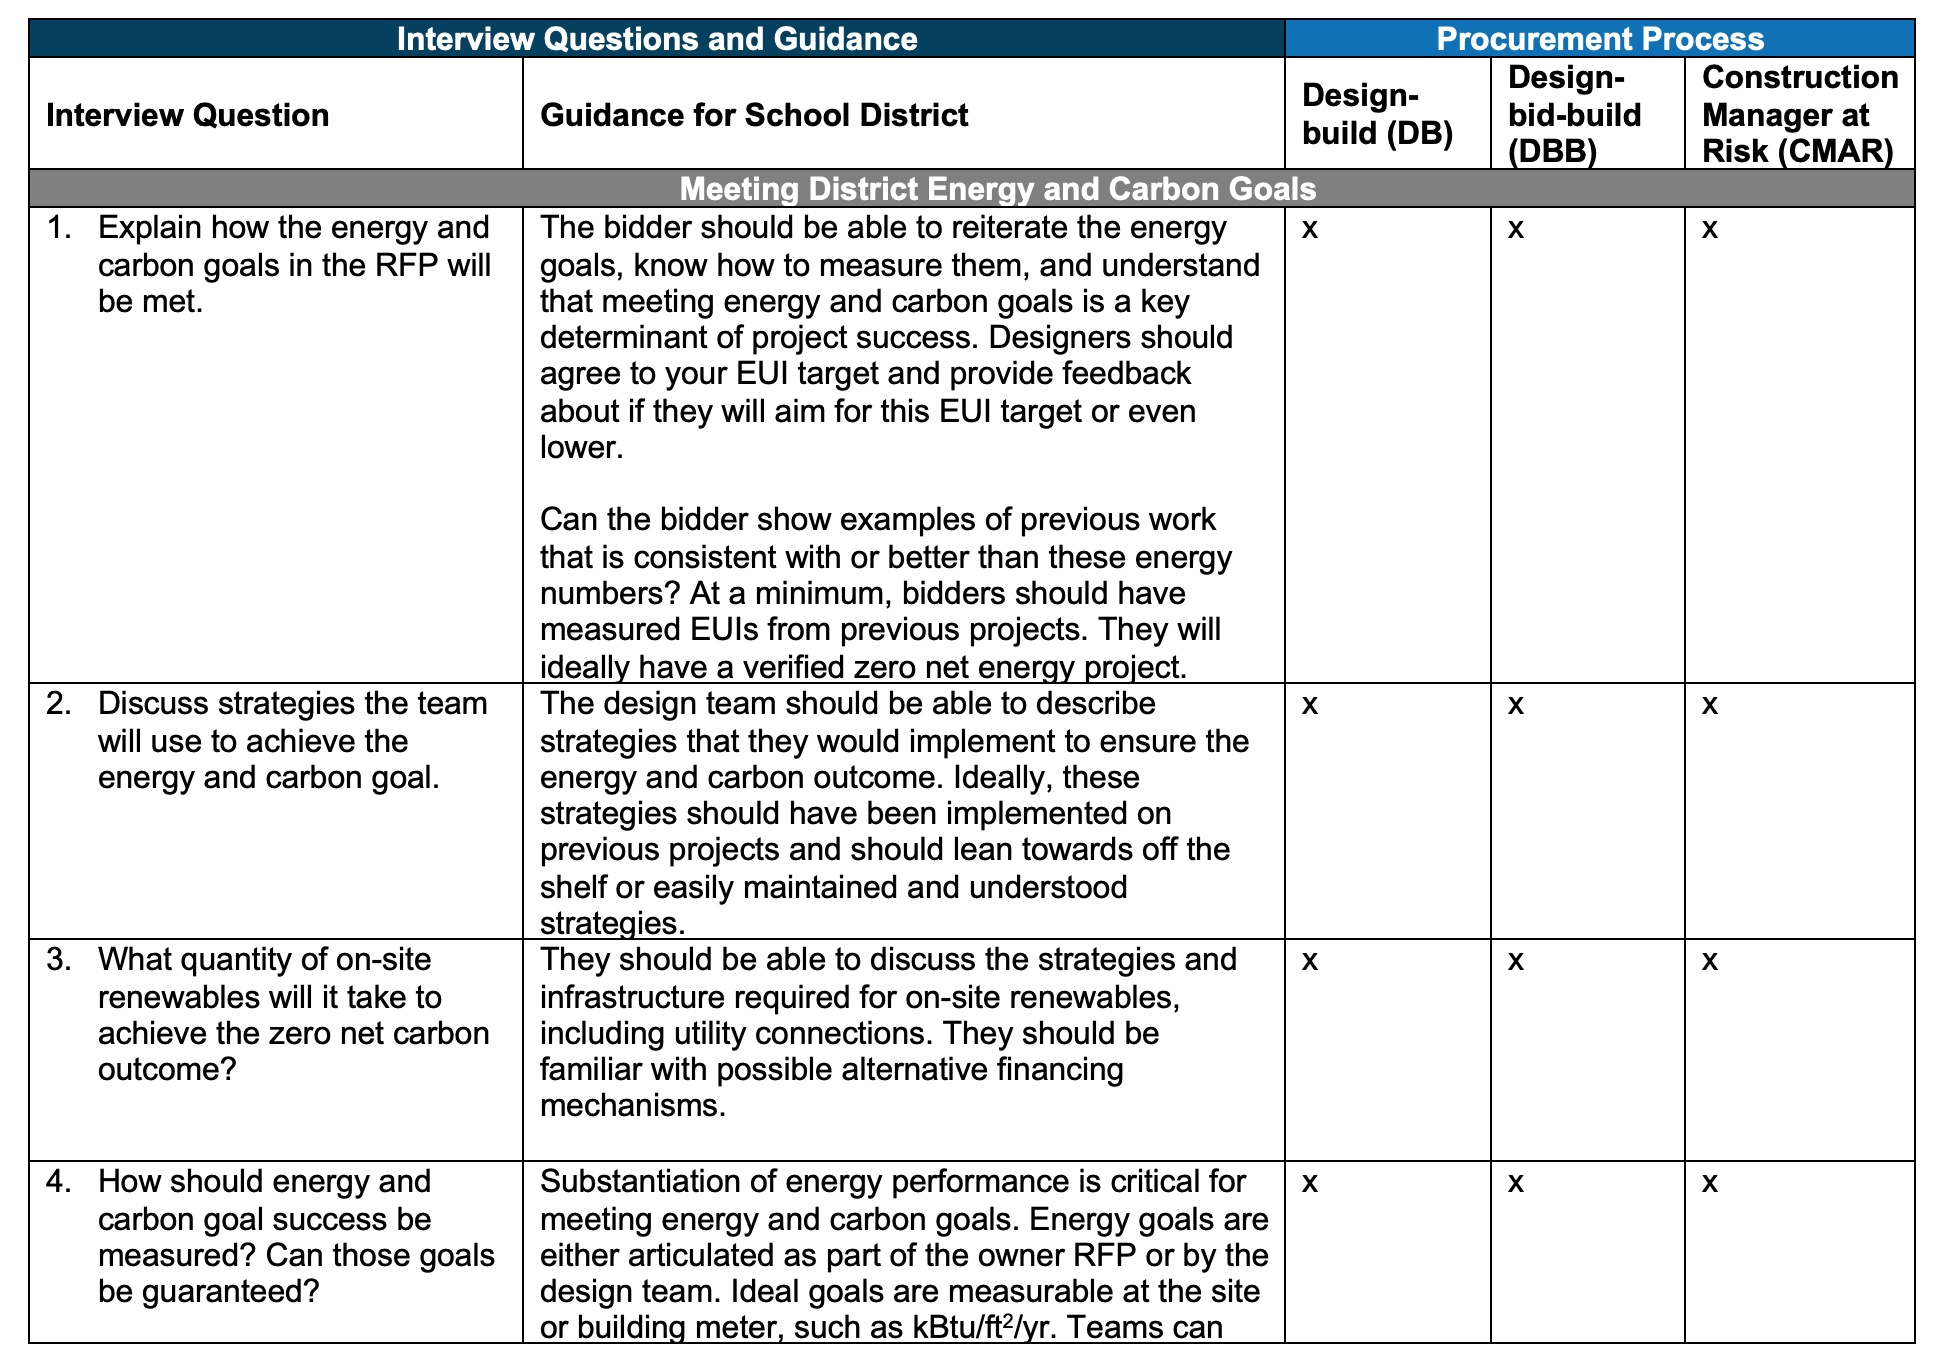 Table with various interview questions and guidance that's contained in the document